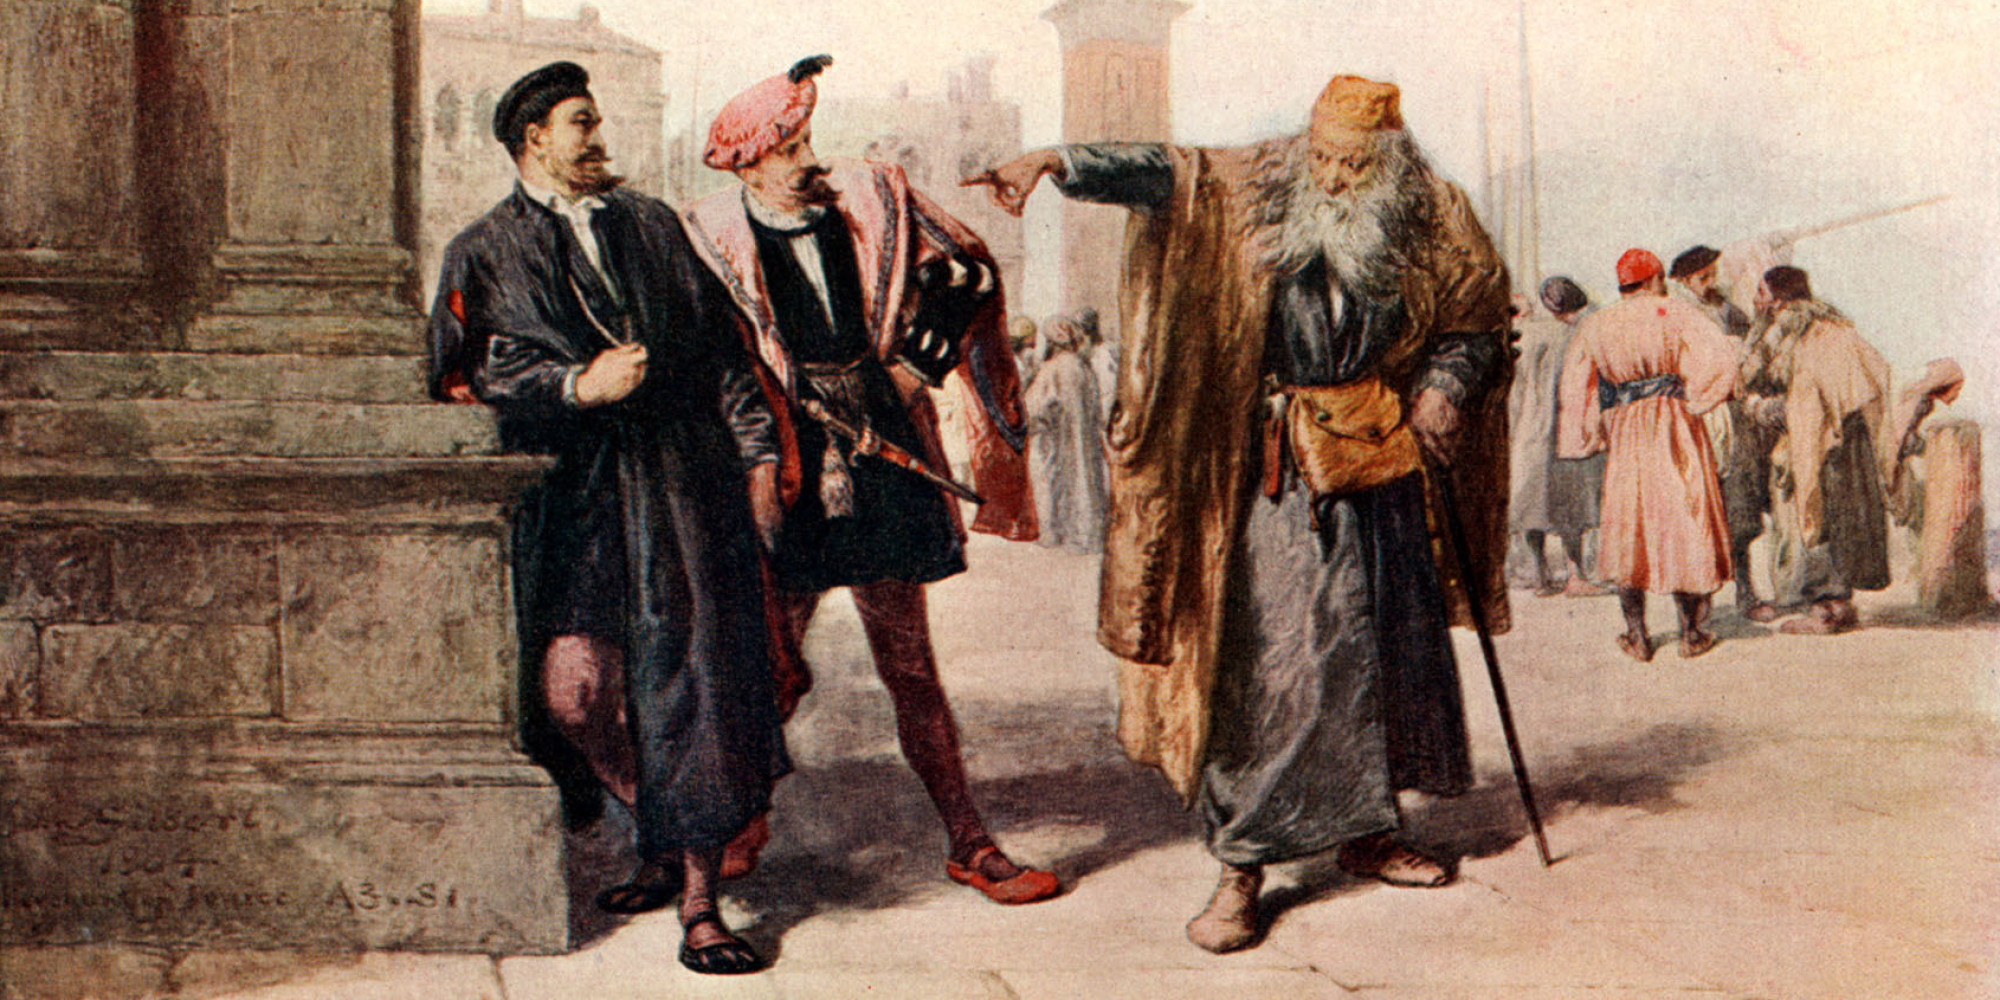 SHAKESPEARE - MERCHANT OF VENICE Act III. Scene I by John Gilbert, comedy,  'if you prick us do we not bleed' speech by Shylock describing the lack of difference in humanity between Jews and Christians.  (Photo by Culture Club/Getty Images)